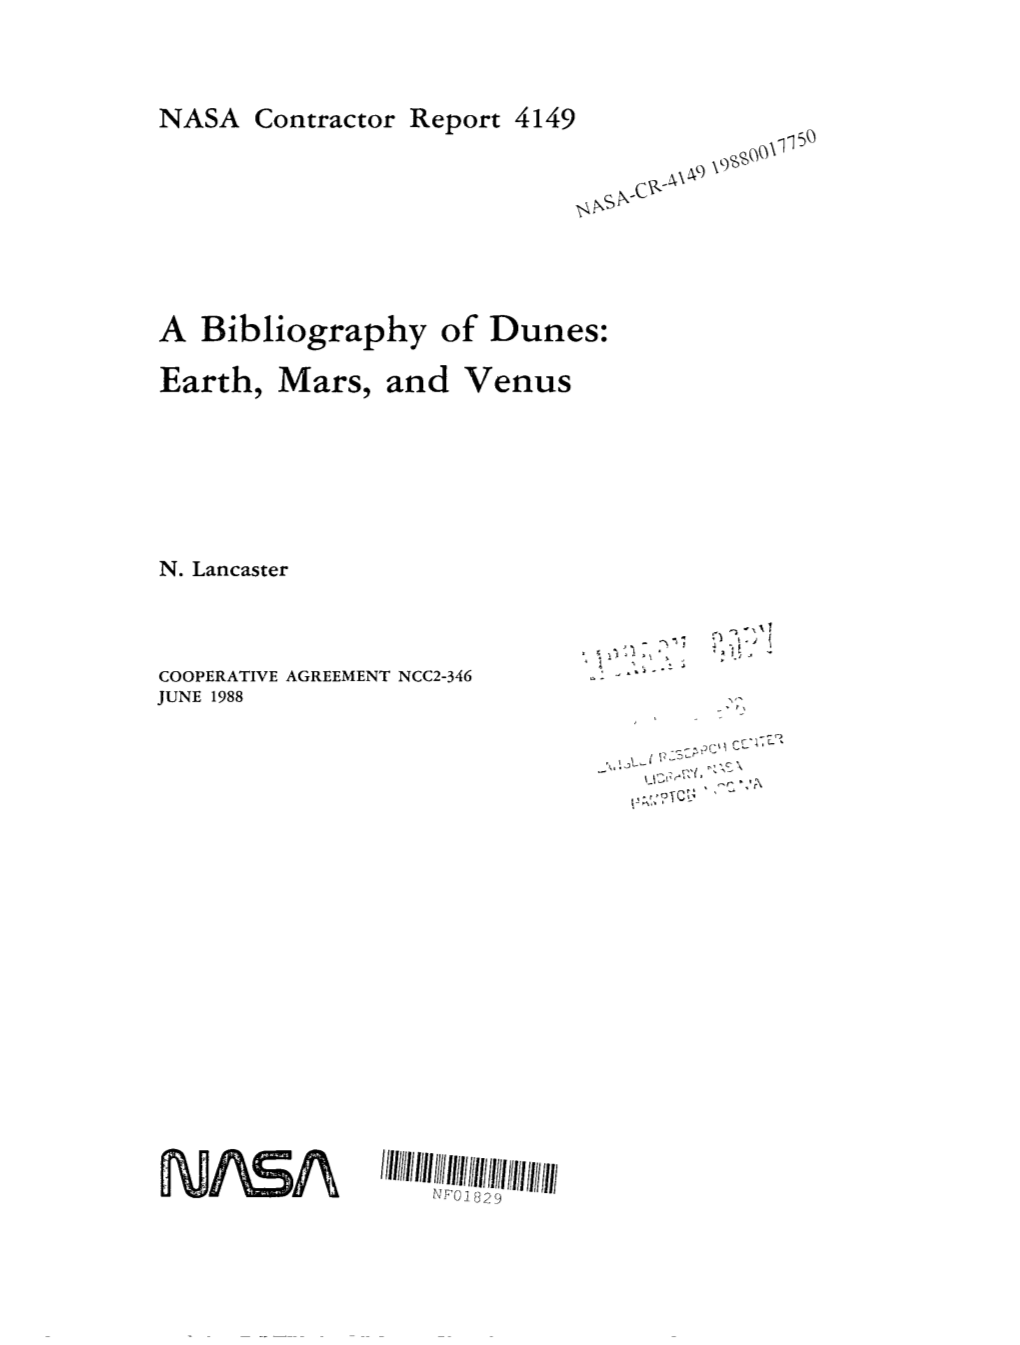 A Bibliography of Dunes: Earth, Mars, and Venus